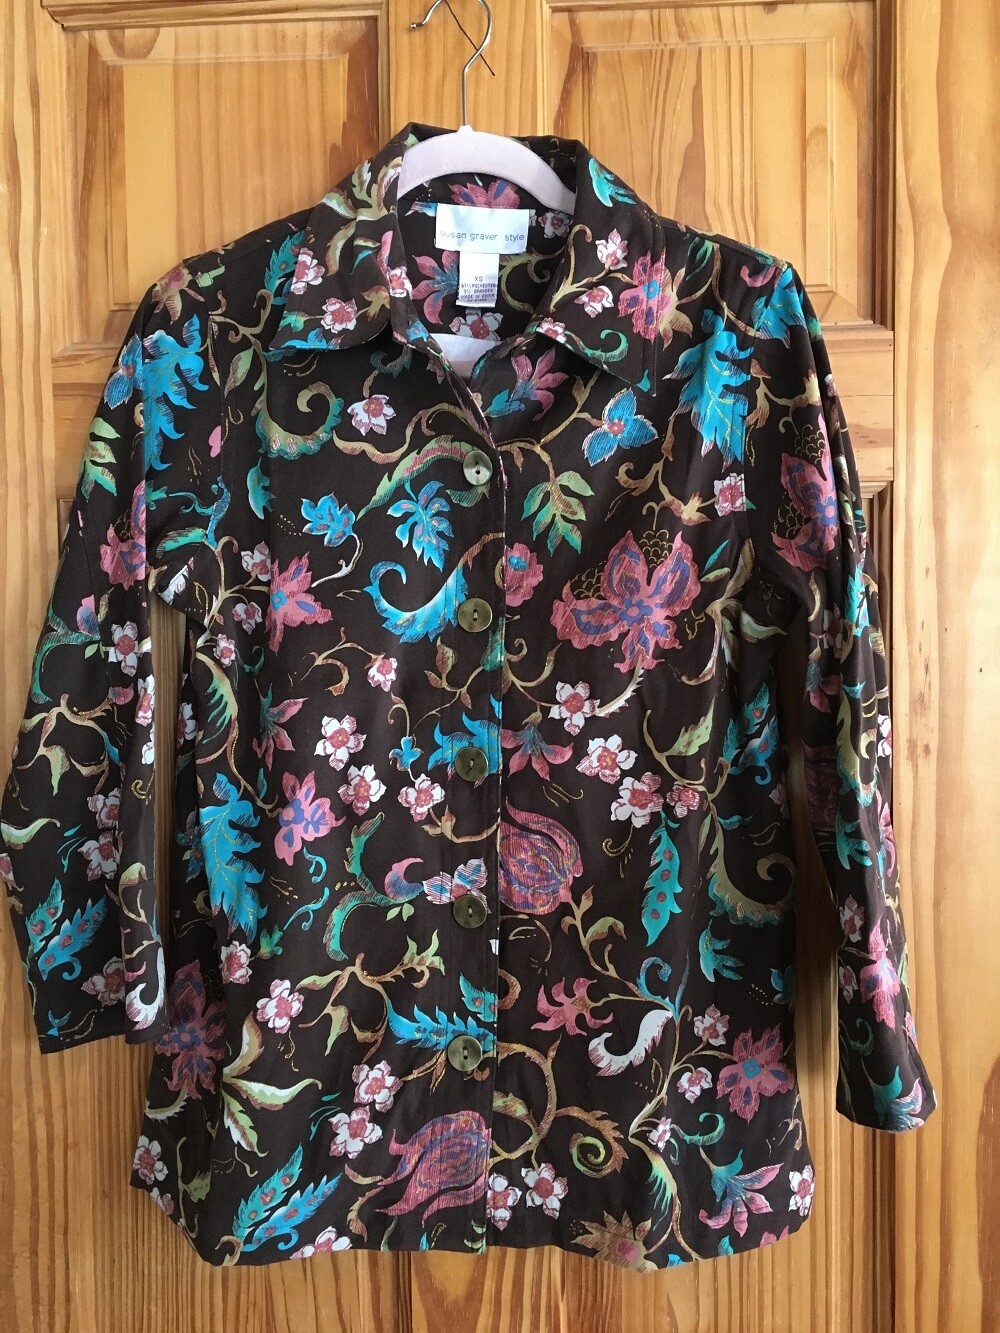 Brown Patterned Blouse - Size XS